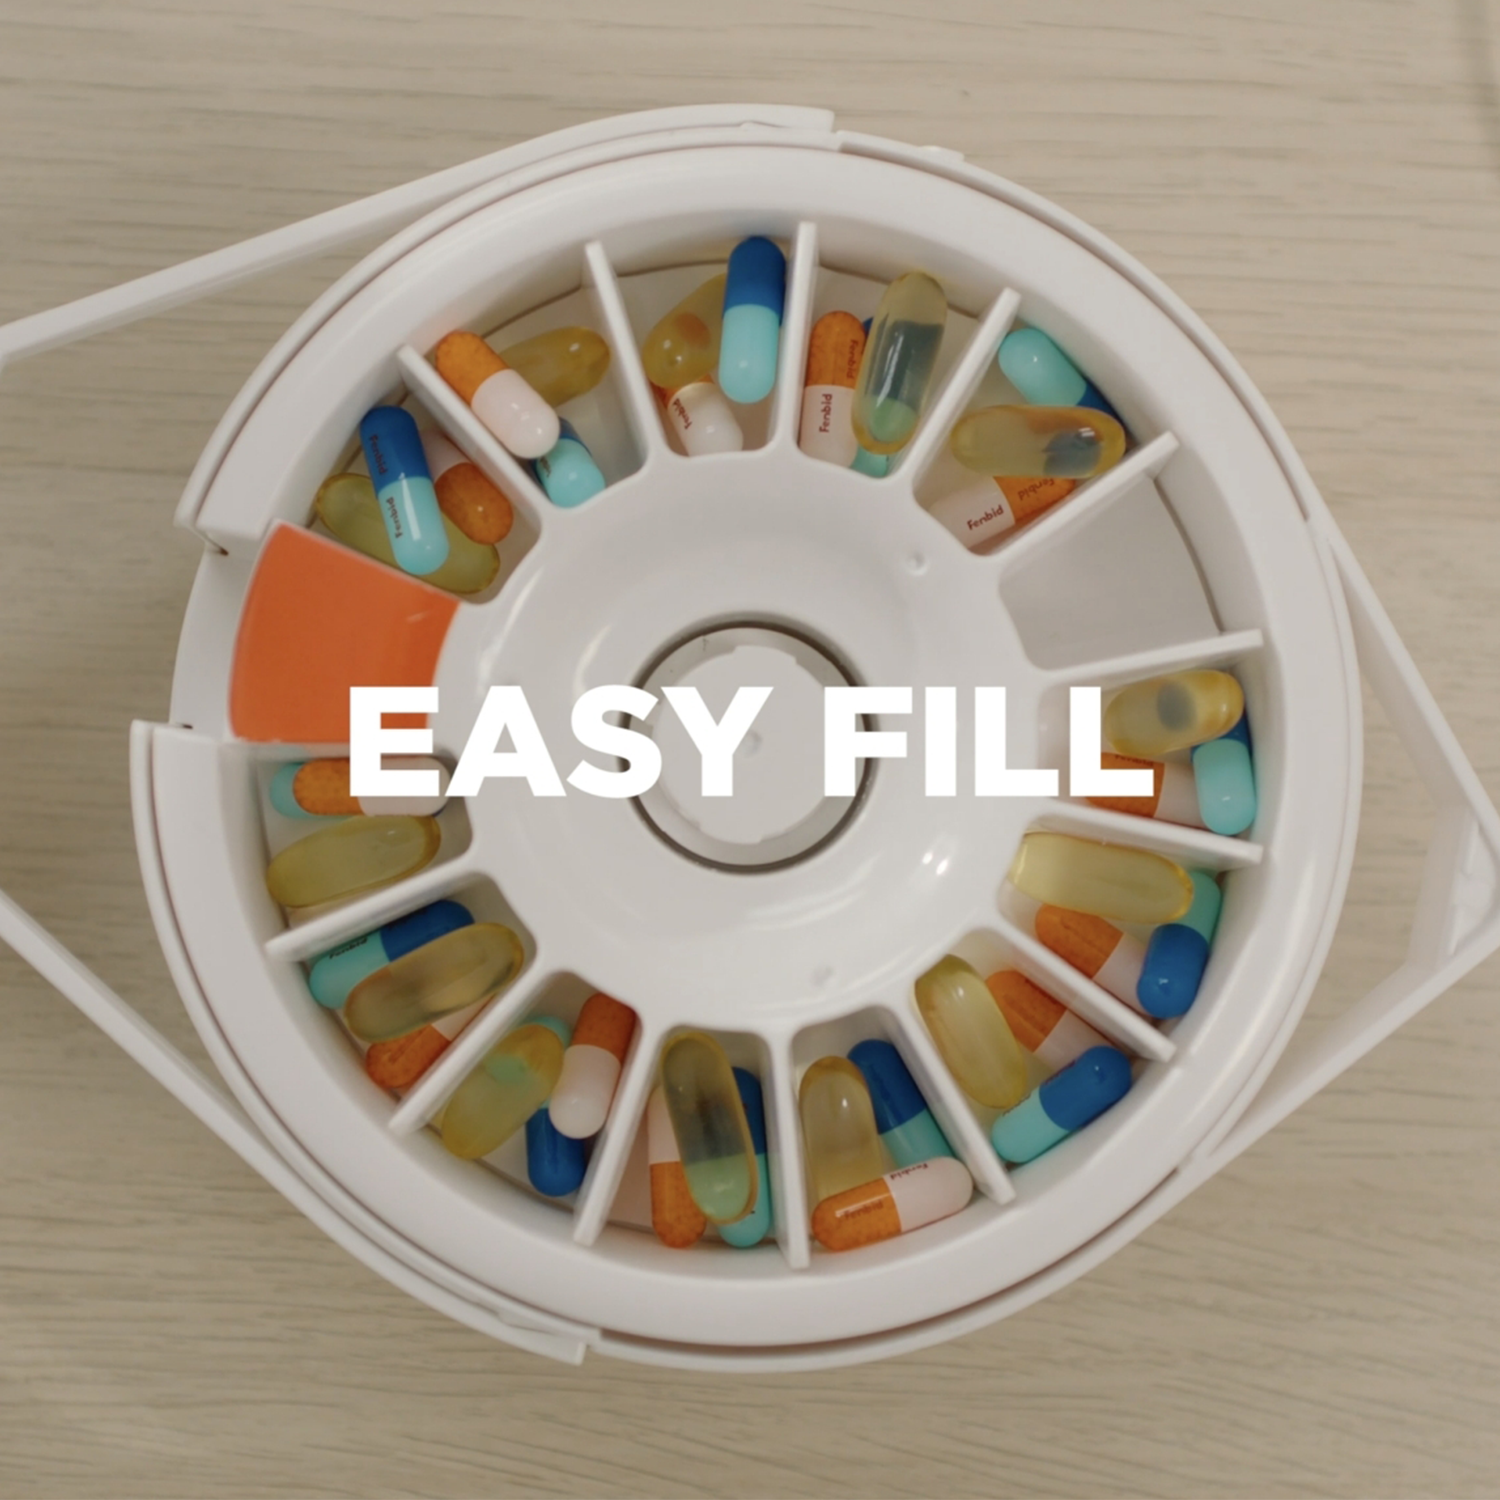 SPINDO - Fullicon Quick Fill Pill Dispenser Hanging on The Wall, Convenient Pill Dispenser with Easy Press Open Design, Large Capacity for Home & Office